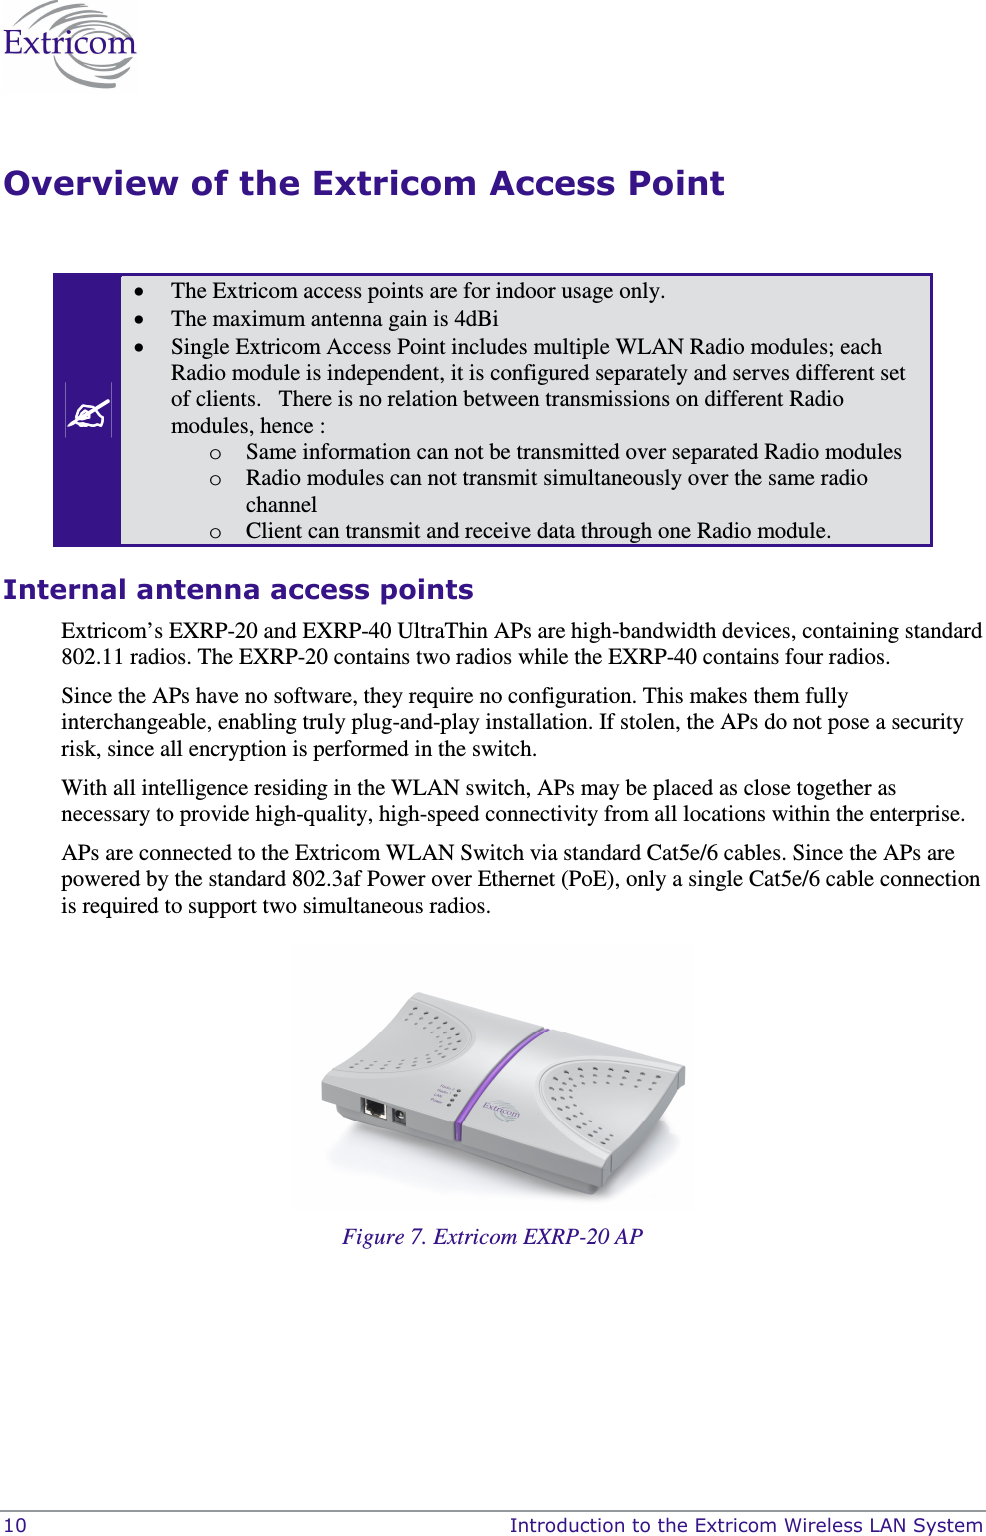  10    Introduction to the Extricom Wireless LAN System Overview of the Extricom Access Point   • The Extricom access points are for indoor usage only.   • The maximum antenna gain is 4dBi  • Single Extricom Access Point includes multiple WLAN Radio modules; each Radio module is independent, it is configured separately and serves different set of clients.   There is no relation between transmissions on different Radio modules, hence :  o Same information can not be transmitted over separated Radio modules o Radio modules can not transmit simultaneously over the same radio channel   o Client can transmit and receive data through one Radio module.   Internal antenna access points  Extricom’s EXRP-20 and EXRP-40 UltraThin APs are high-bandwidth devices, containing standard 802.11 radios. The EXRP-20 contains two radios while the EXRP-40 contains four radios.  Since the APs have no software, they require no configuration. This makes them fully interchangeable, enabling truly plug-and-play installation. If stolen, the APs do not pose a security risk, since all encryption is performed in the switch. With all intelligence residing in the WLAN switch, APs may be placed as close together as necessary to provide high-quality, high-speed connectivity from all locations within the enterprise.  APs are connected to the Extricom WLAN Switch via standard Cat5e/6 cables. Since the APs are powered by the standard 802.3af Power over Ethernet (PoE), only a single Cat5e/6 cable connection is required to support two simultaneous radios.  Figure 7. Extricom EXRP-20 AP  